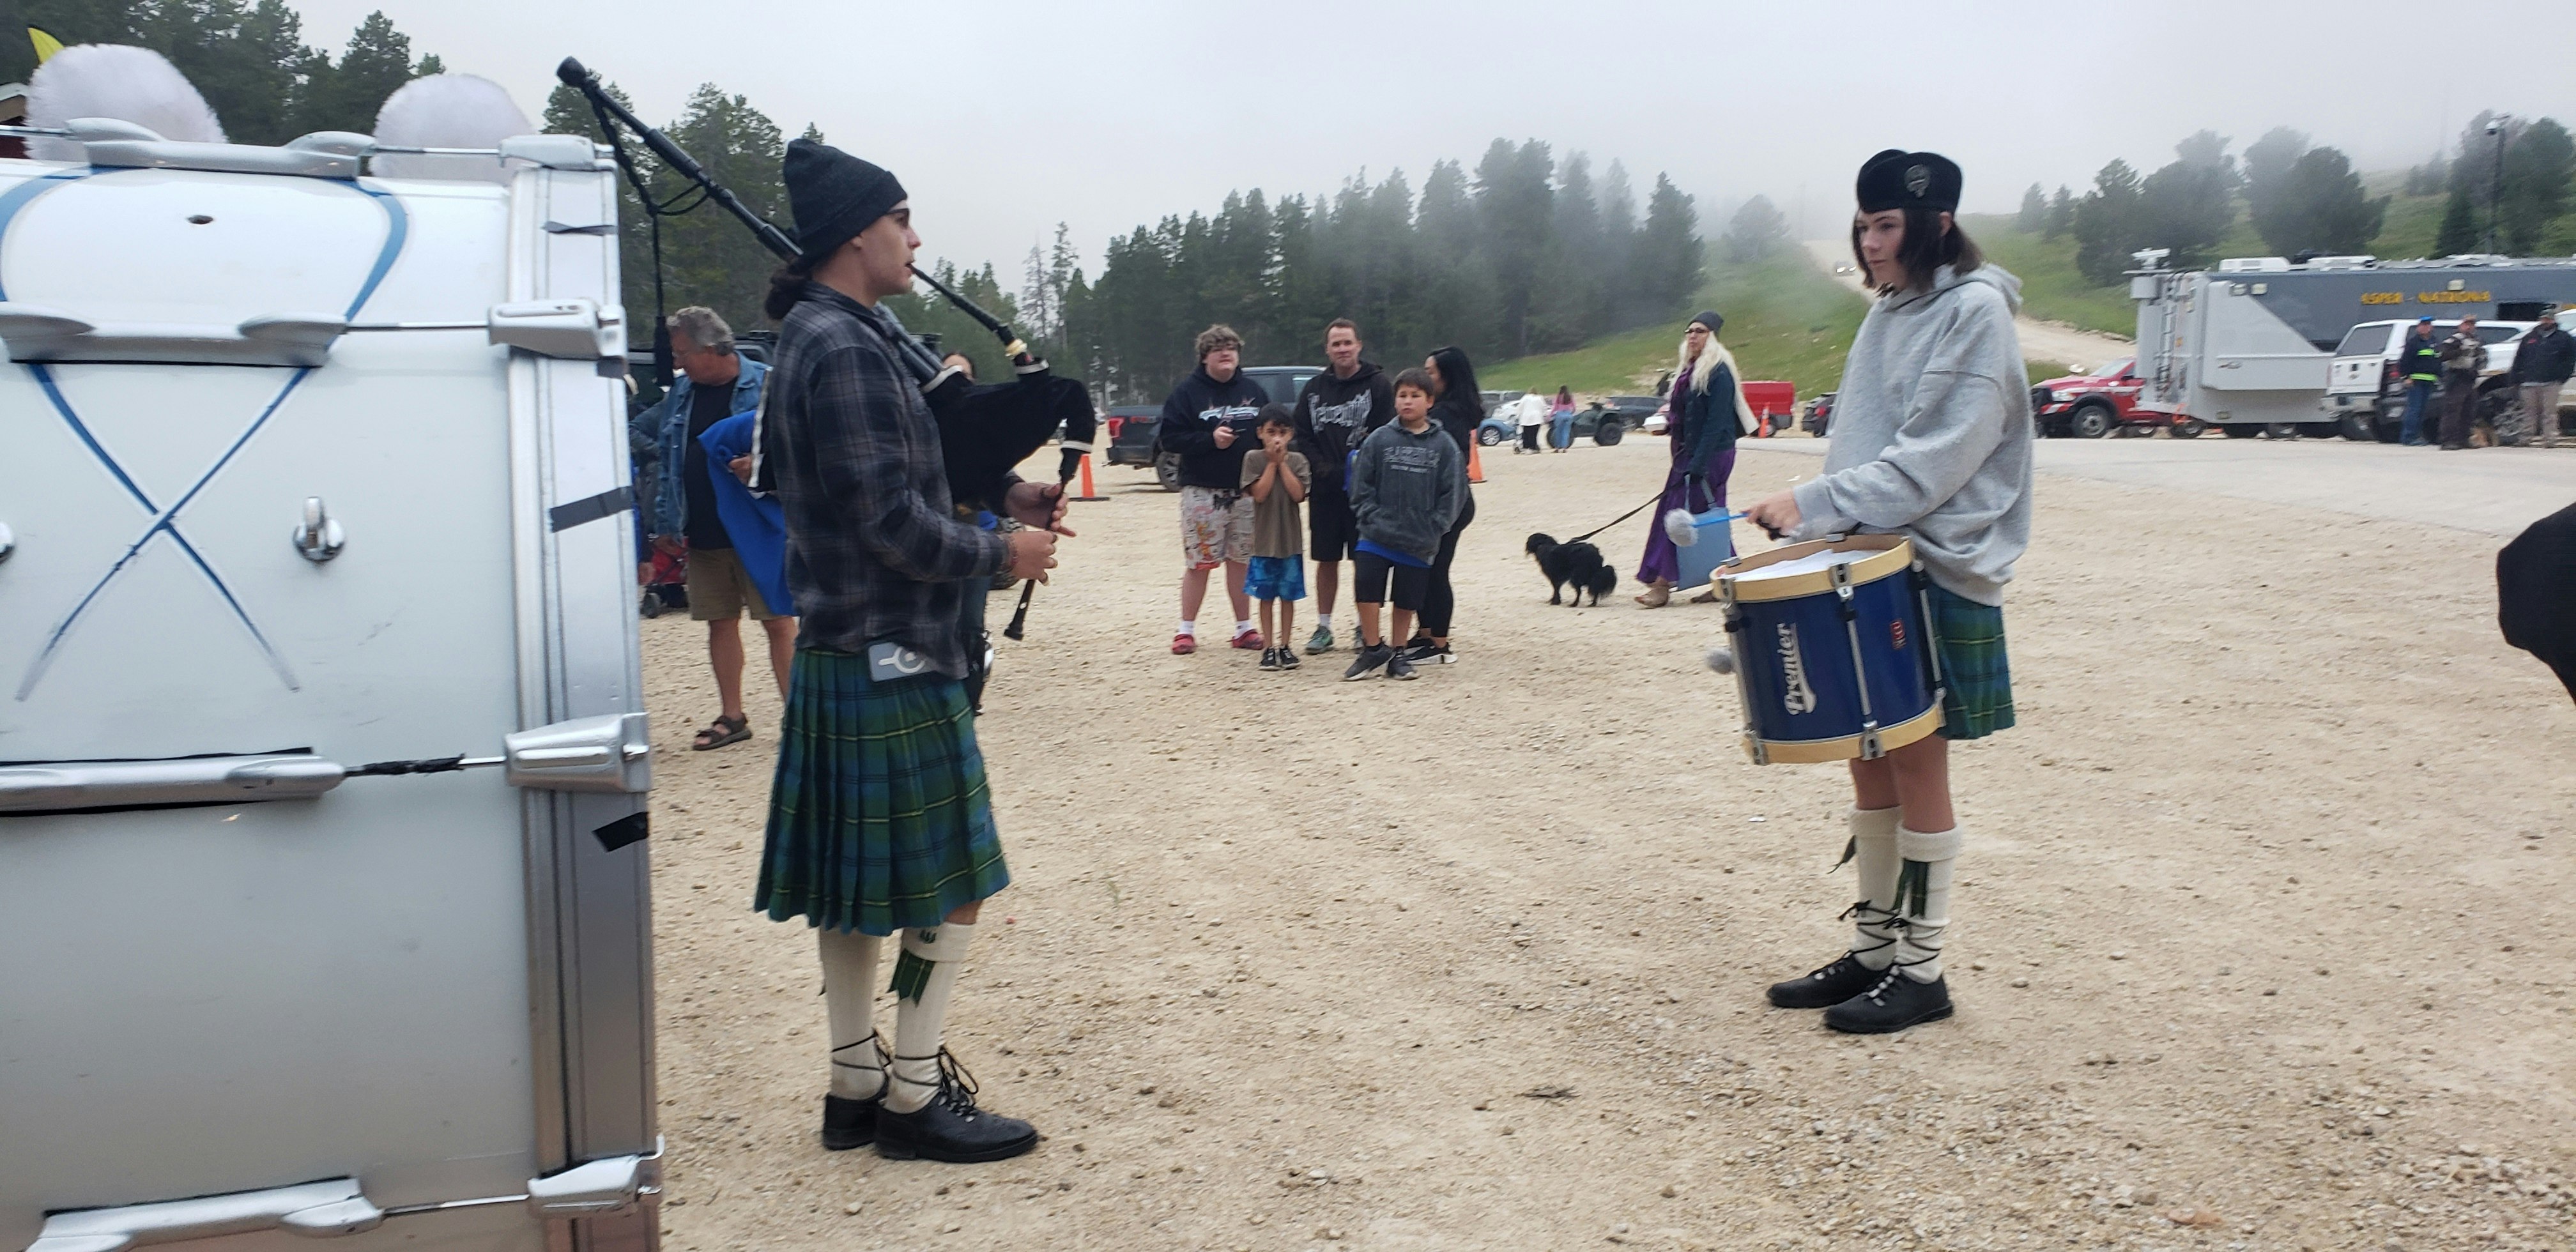 An impromptu jam session between a couple members of the Lander Pipe Band quickly attracted a crowd.